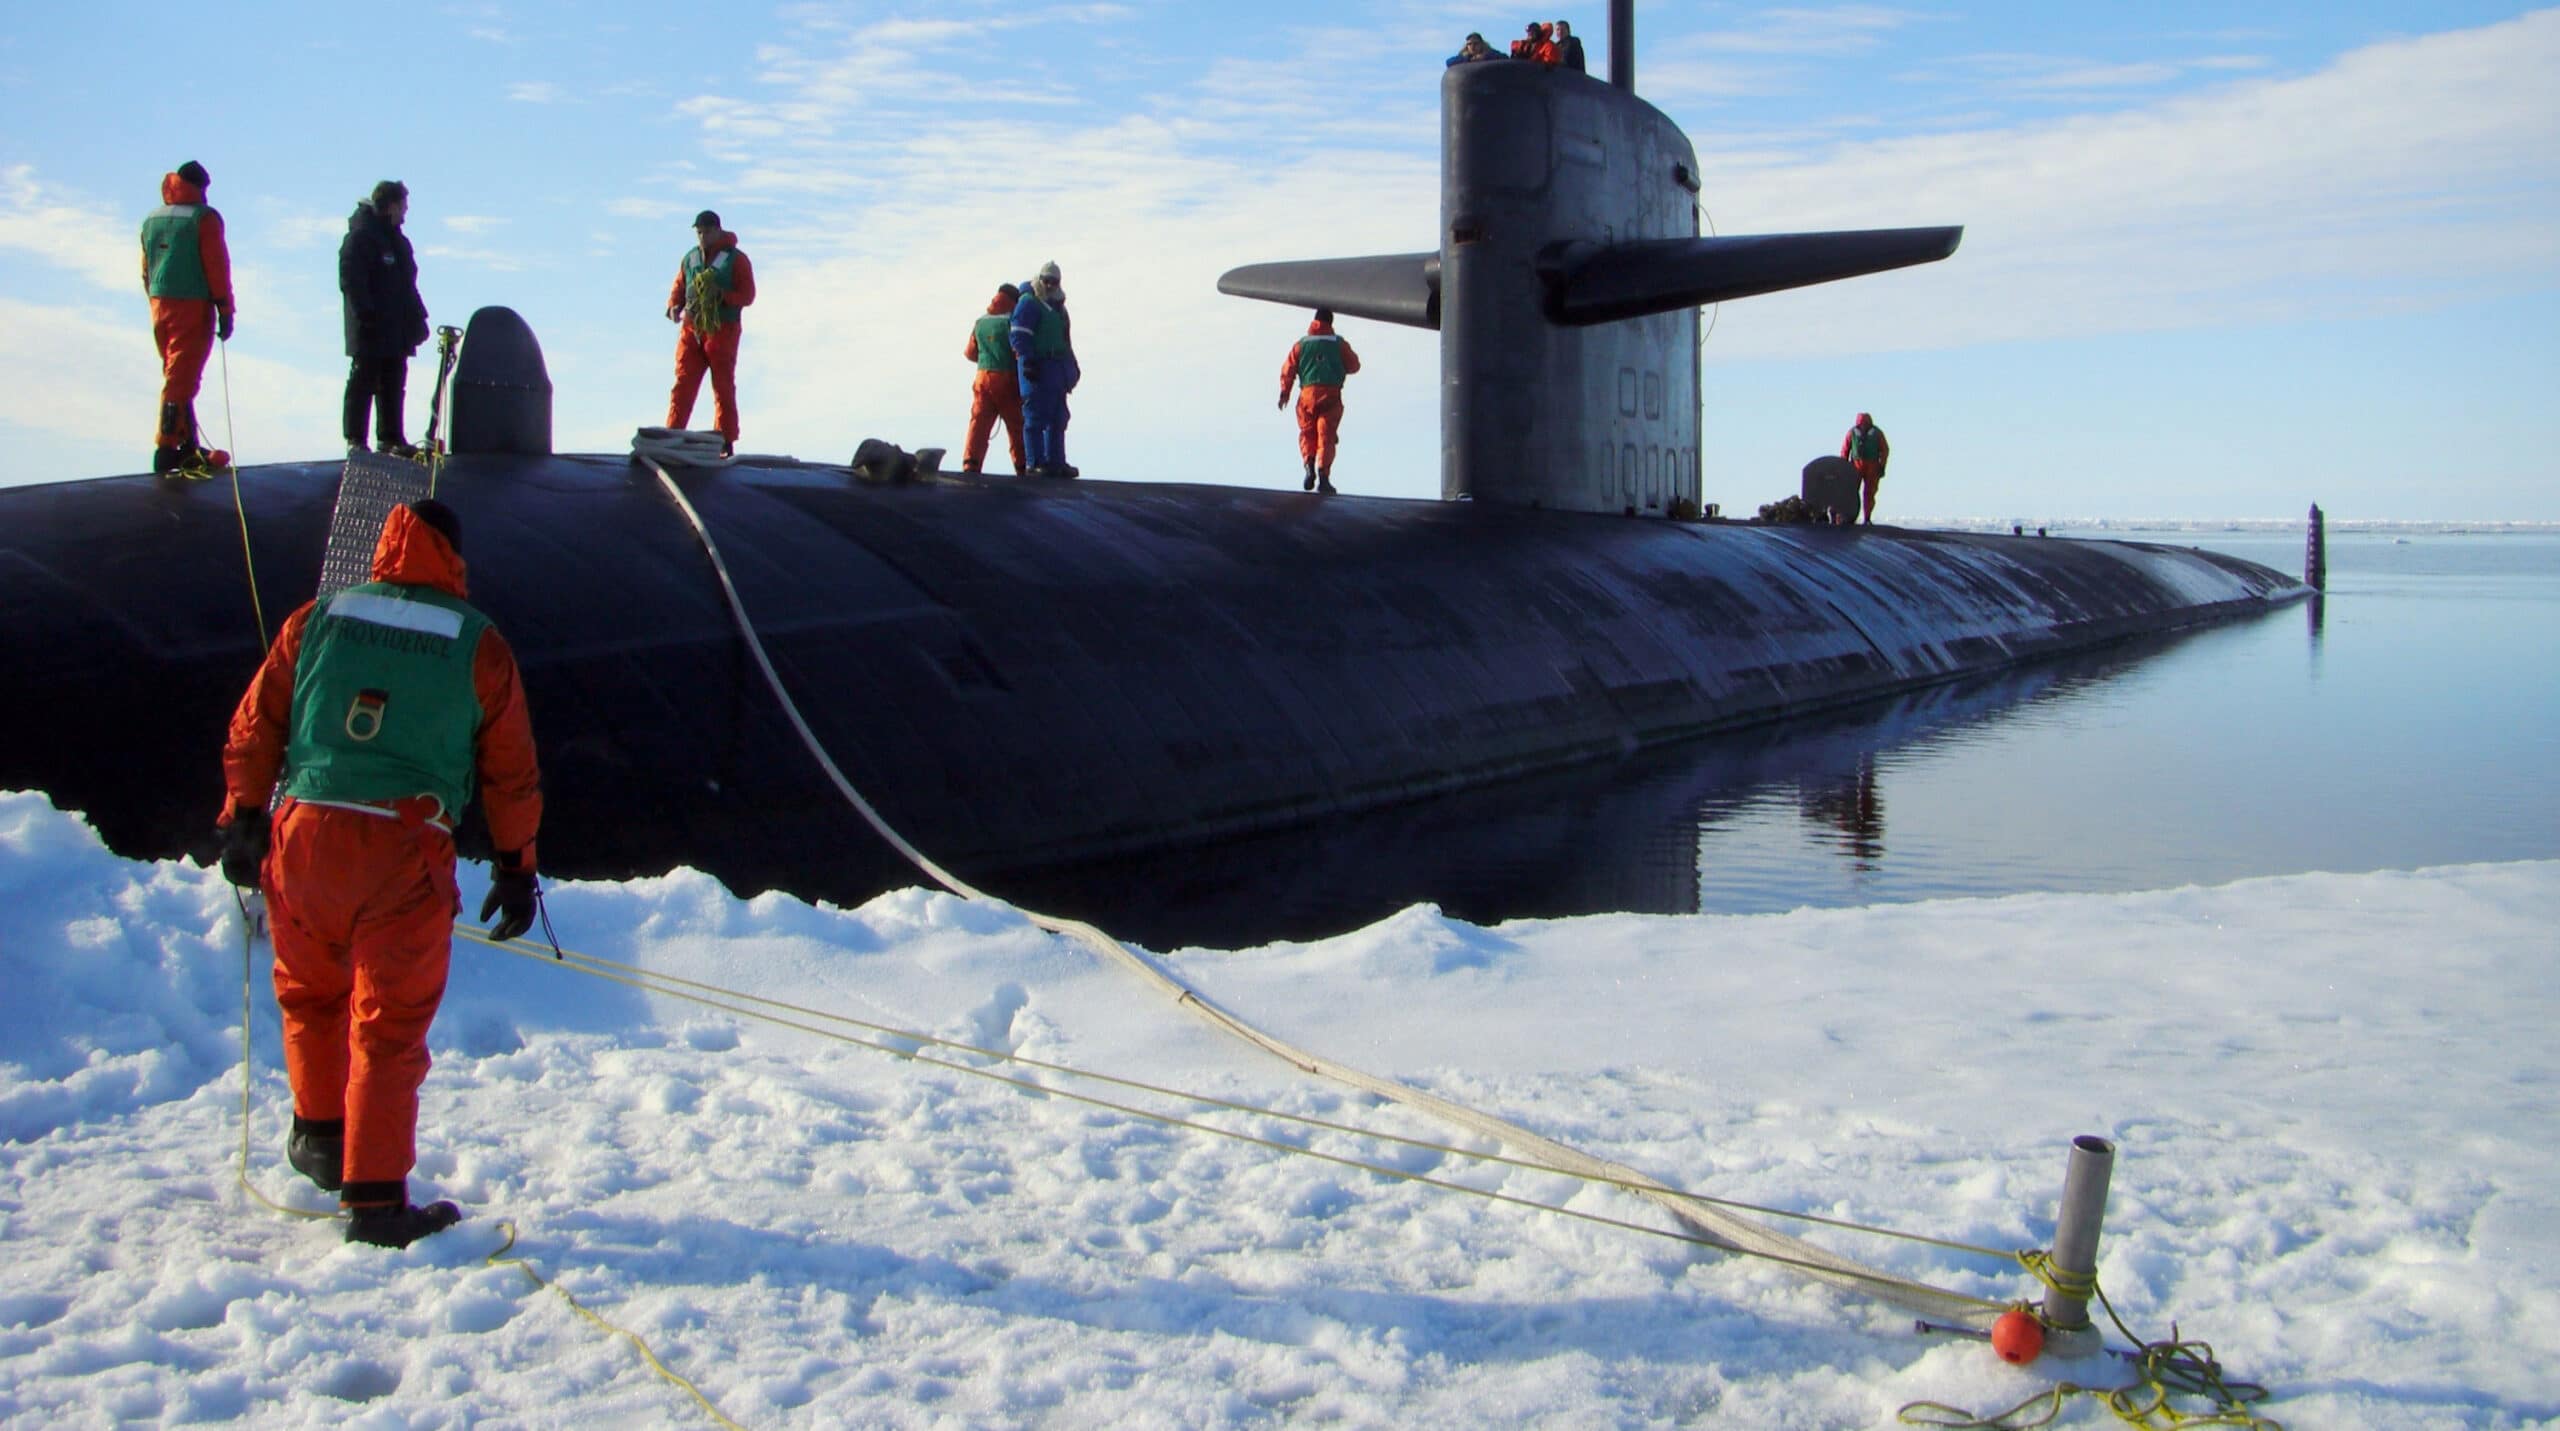 USS Providence docked at ice with sailors standing on the submarine